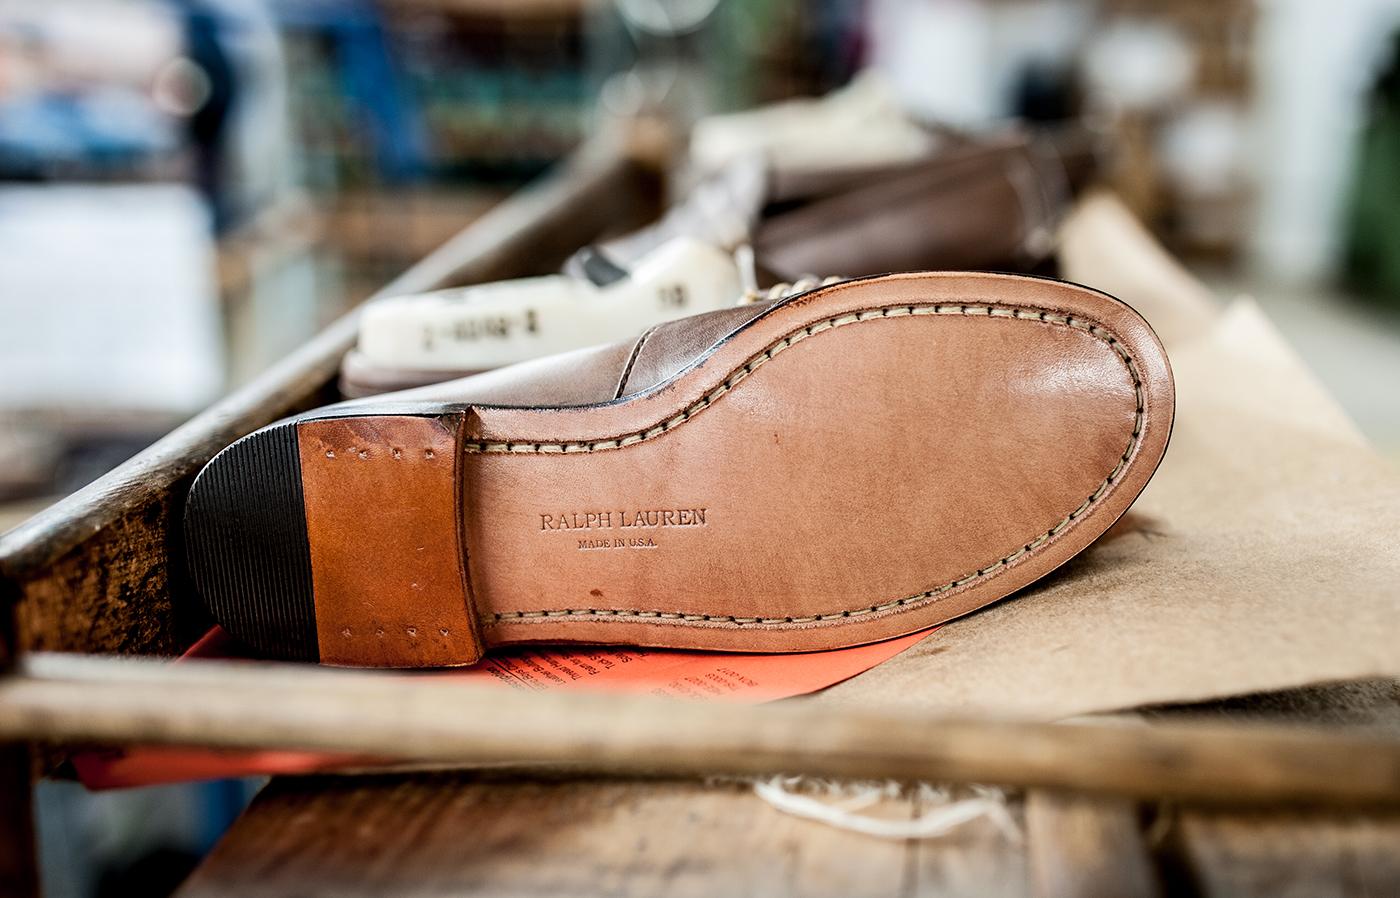                             The final piece of the Edric: a traditional leather sole, stitched directly to the upper so it can be resoled endlessly.